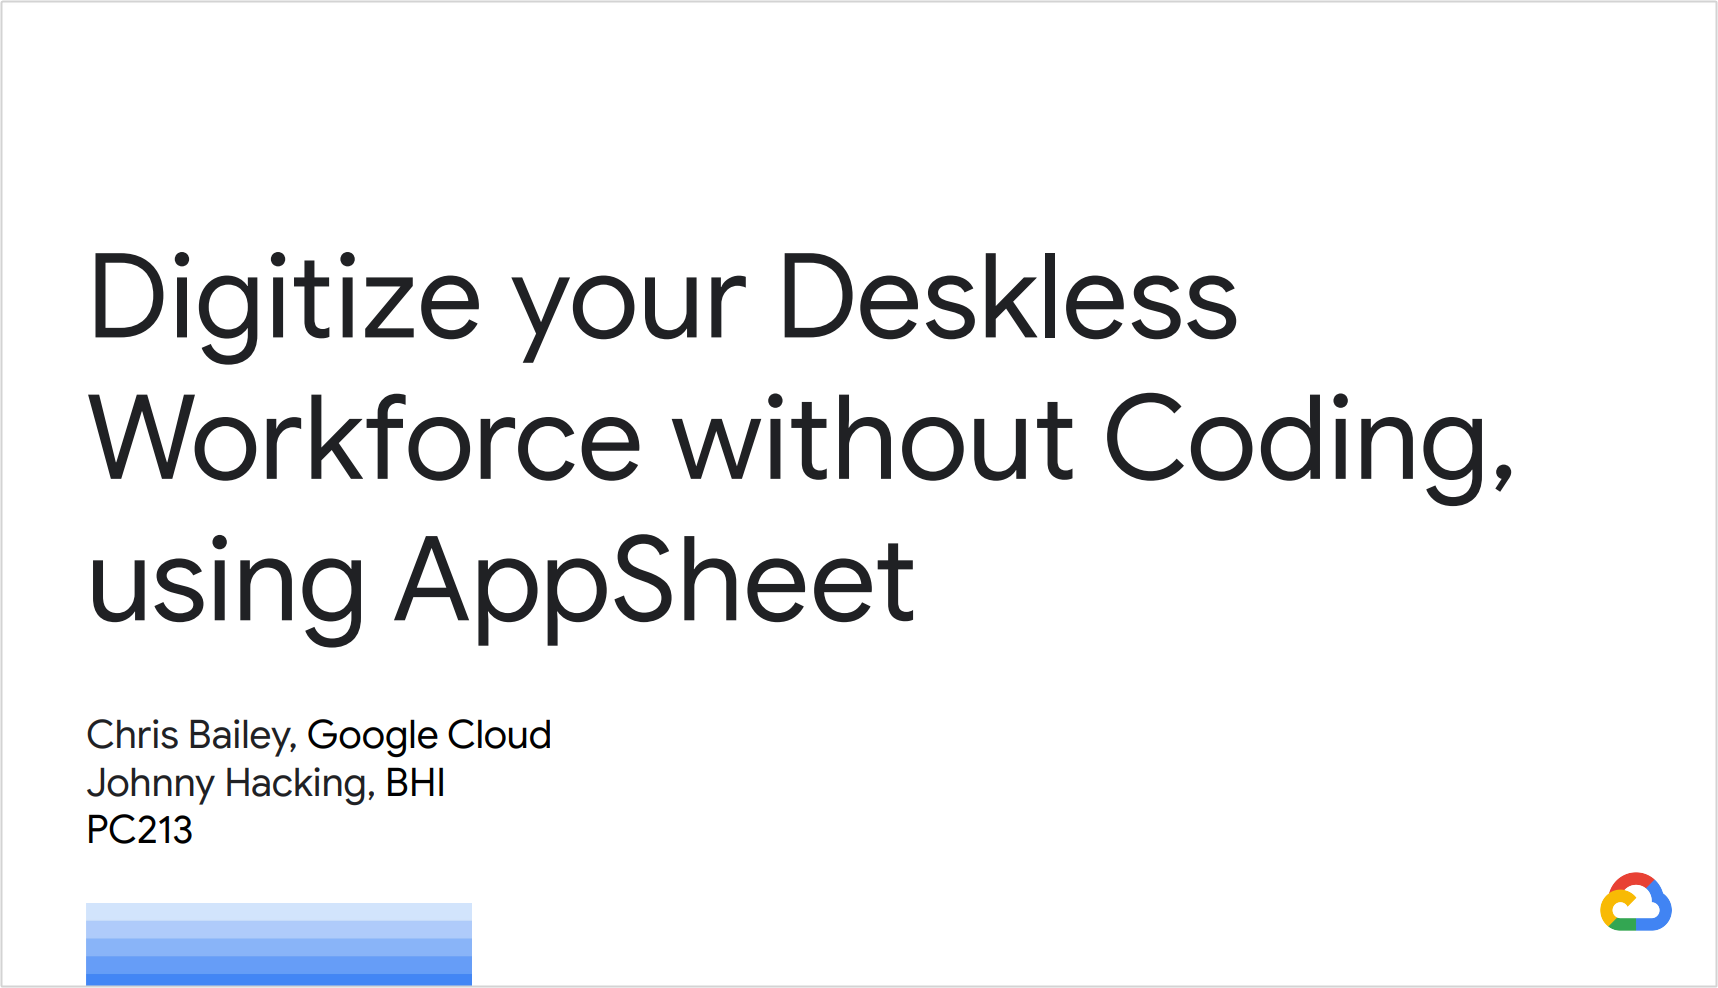 Digitize Your Deskless Workforce Without Coding Using AppSheet